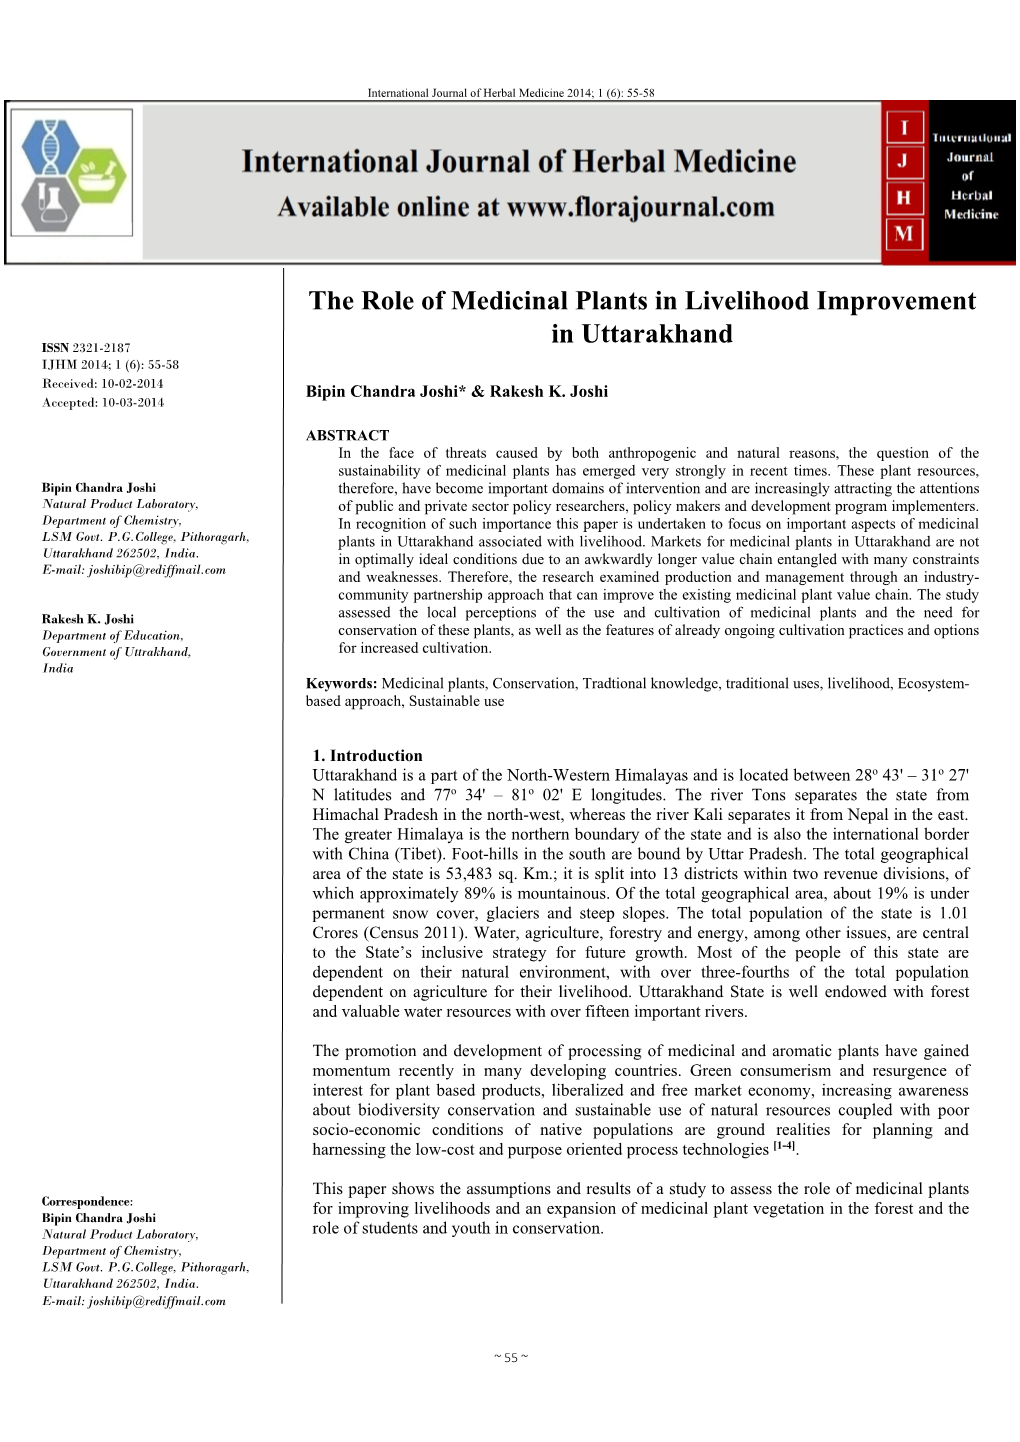 The Role of Medicinal Plants in Livelihood Improvement in Uttarakhand ISSN 2321-2187